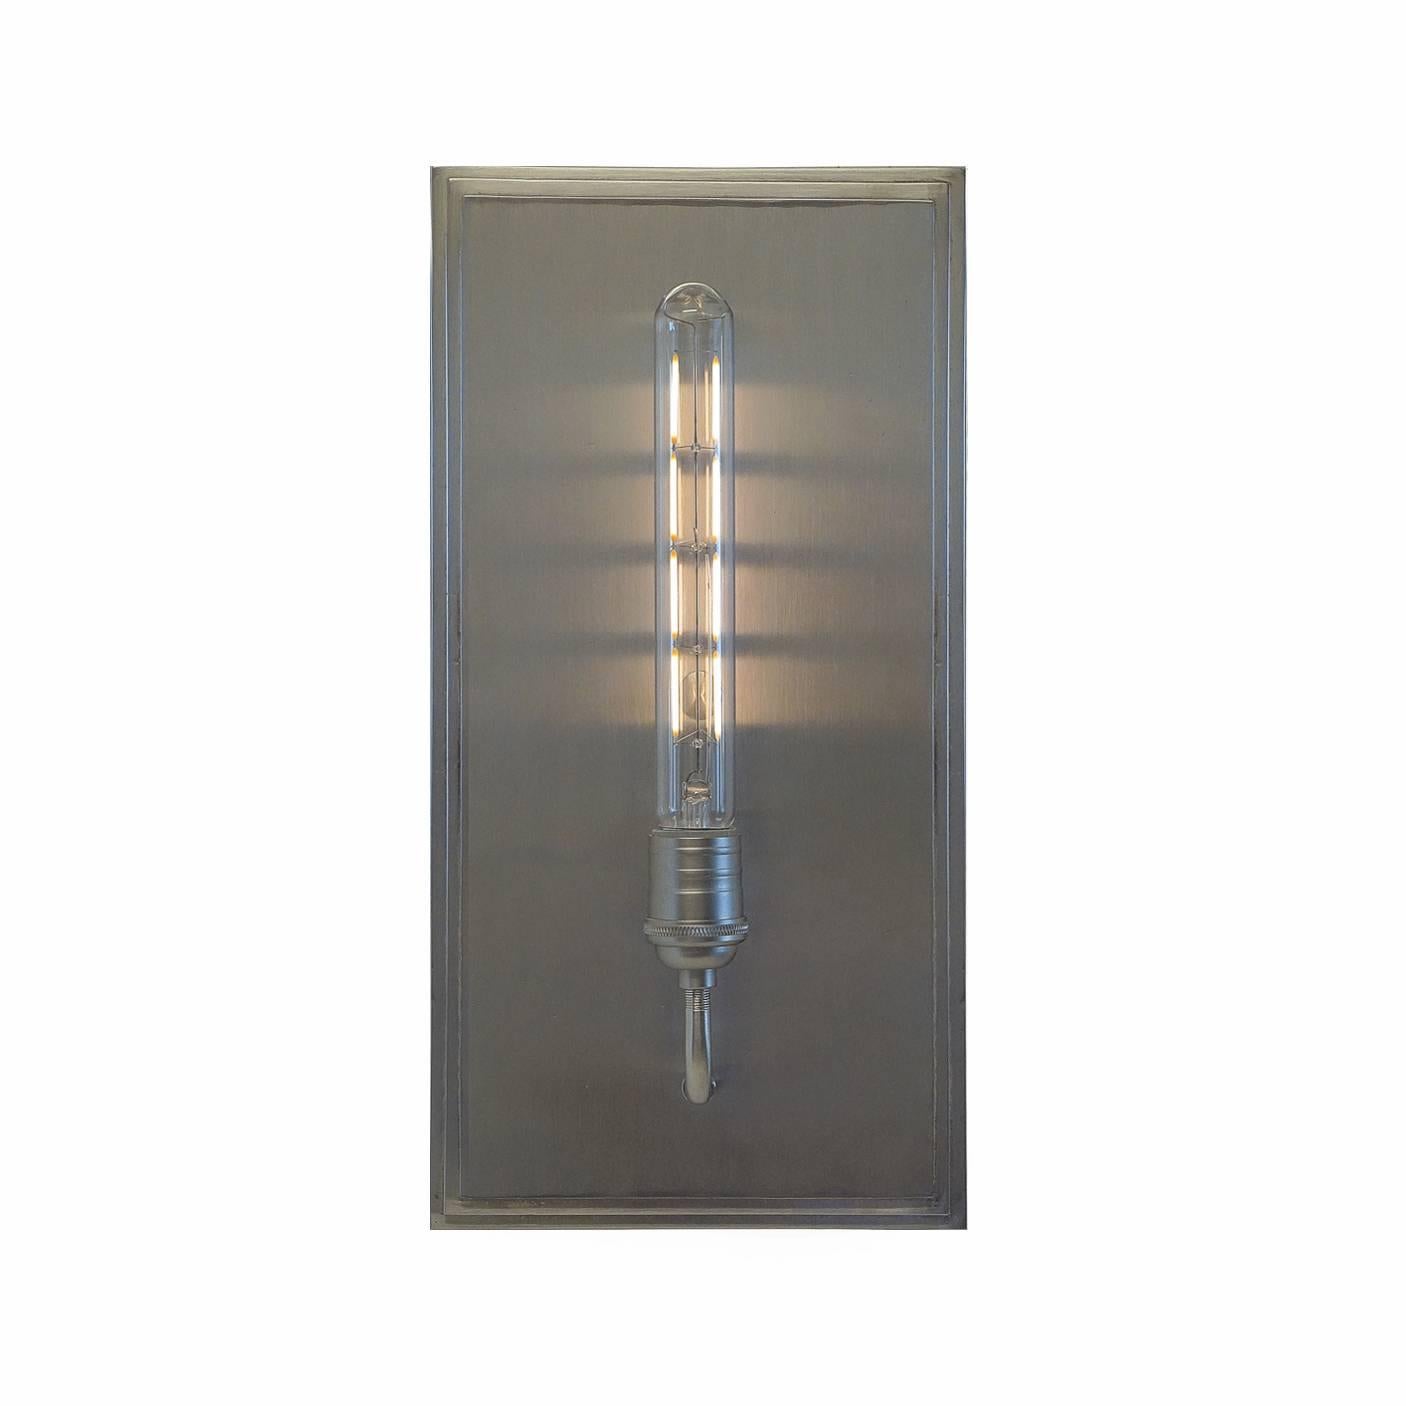 Forthright in its Art Deco inspired step design with clean lines and contemporary styling, this is an elegant interior sconce that is sure to be revered as a piece of art in any room.

Fixture shown in SBLC Brushed Nickel finish.

Hand-forged in